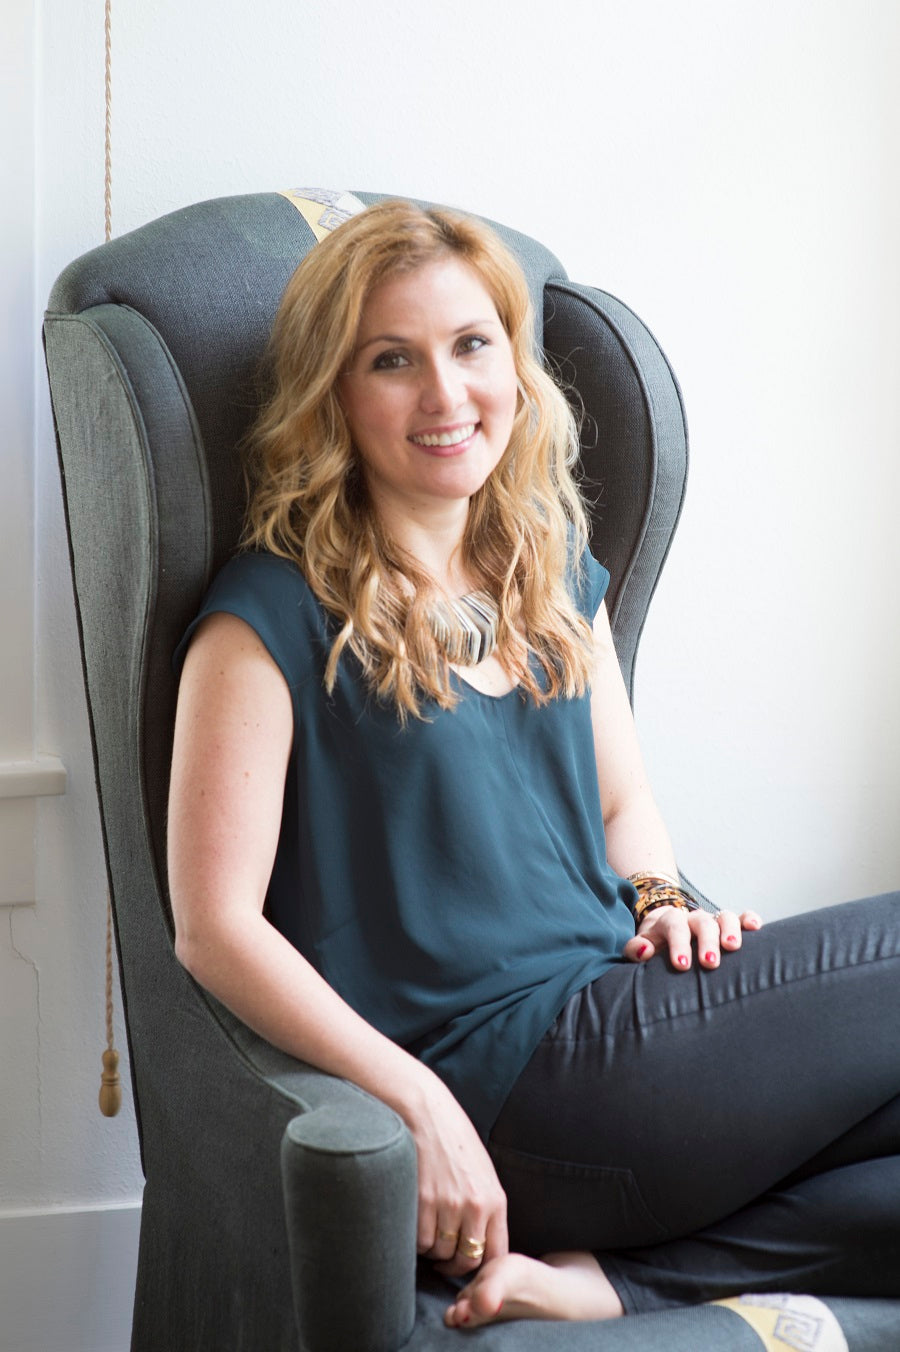 MEG LONERGAN: a day in the life of a passionate interior designer